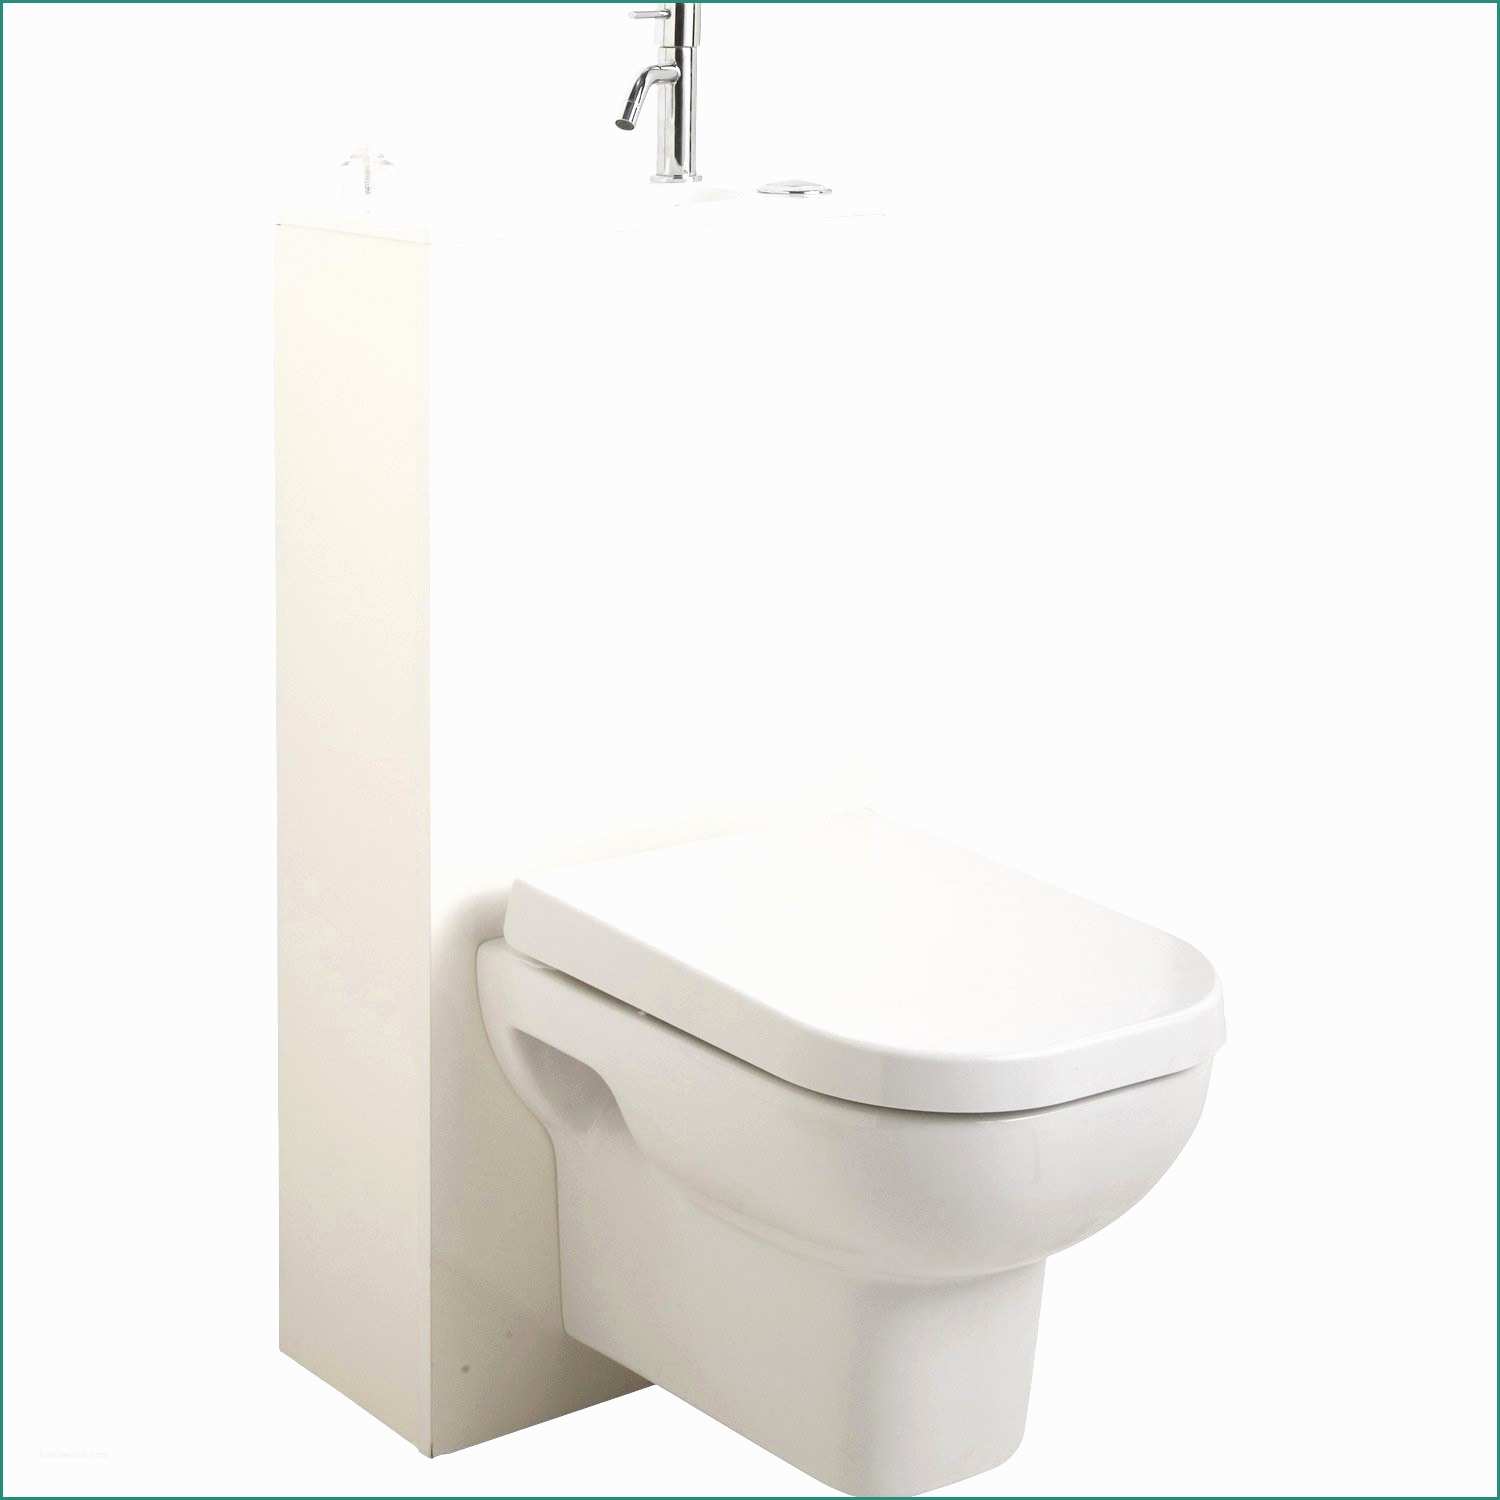 Leroy Merlin Wc E Lavabo Wc Gain Place Beau Bathroom Laundry with Lave Main Angle Et